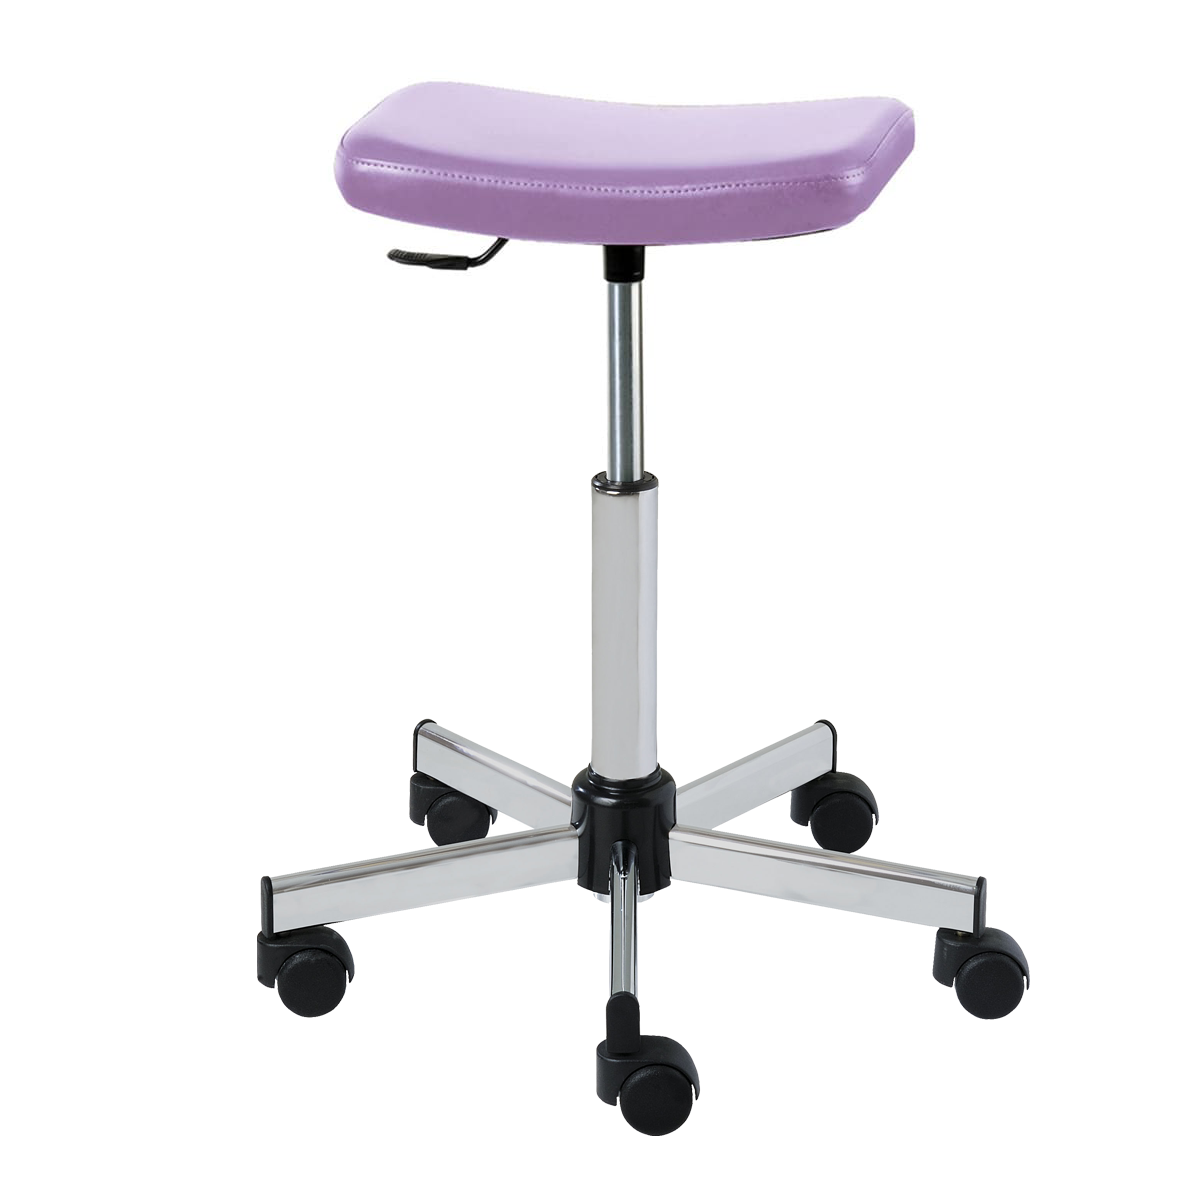 Stool with rectangular seat, stainless steel base